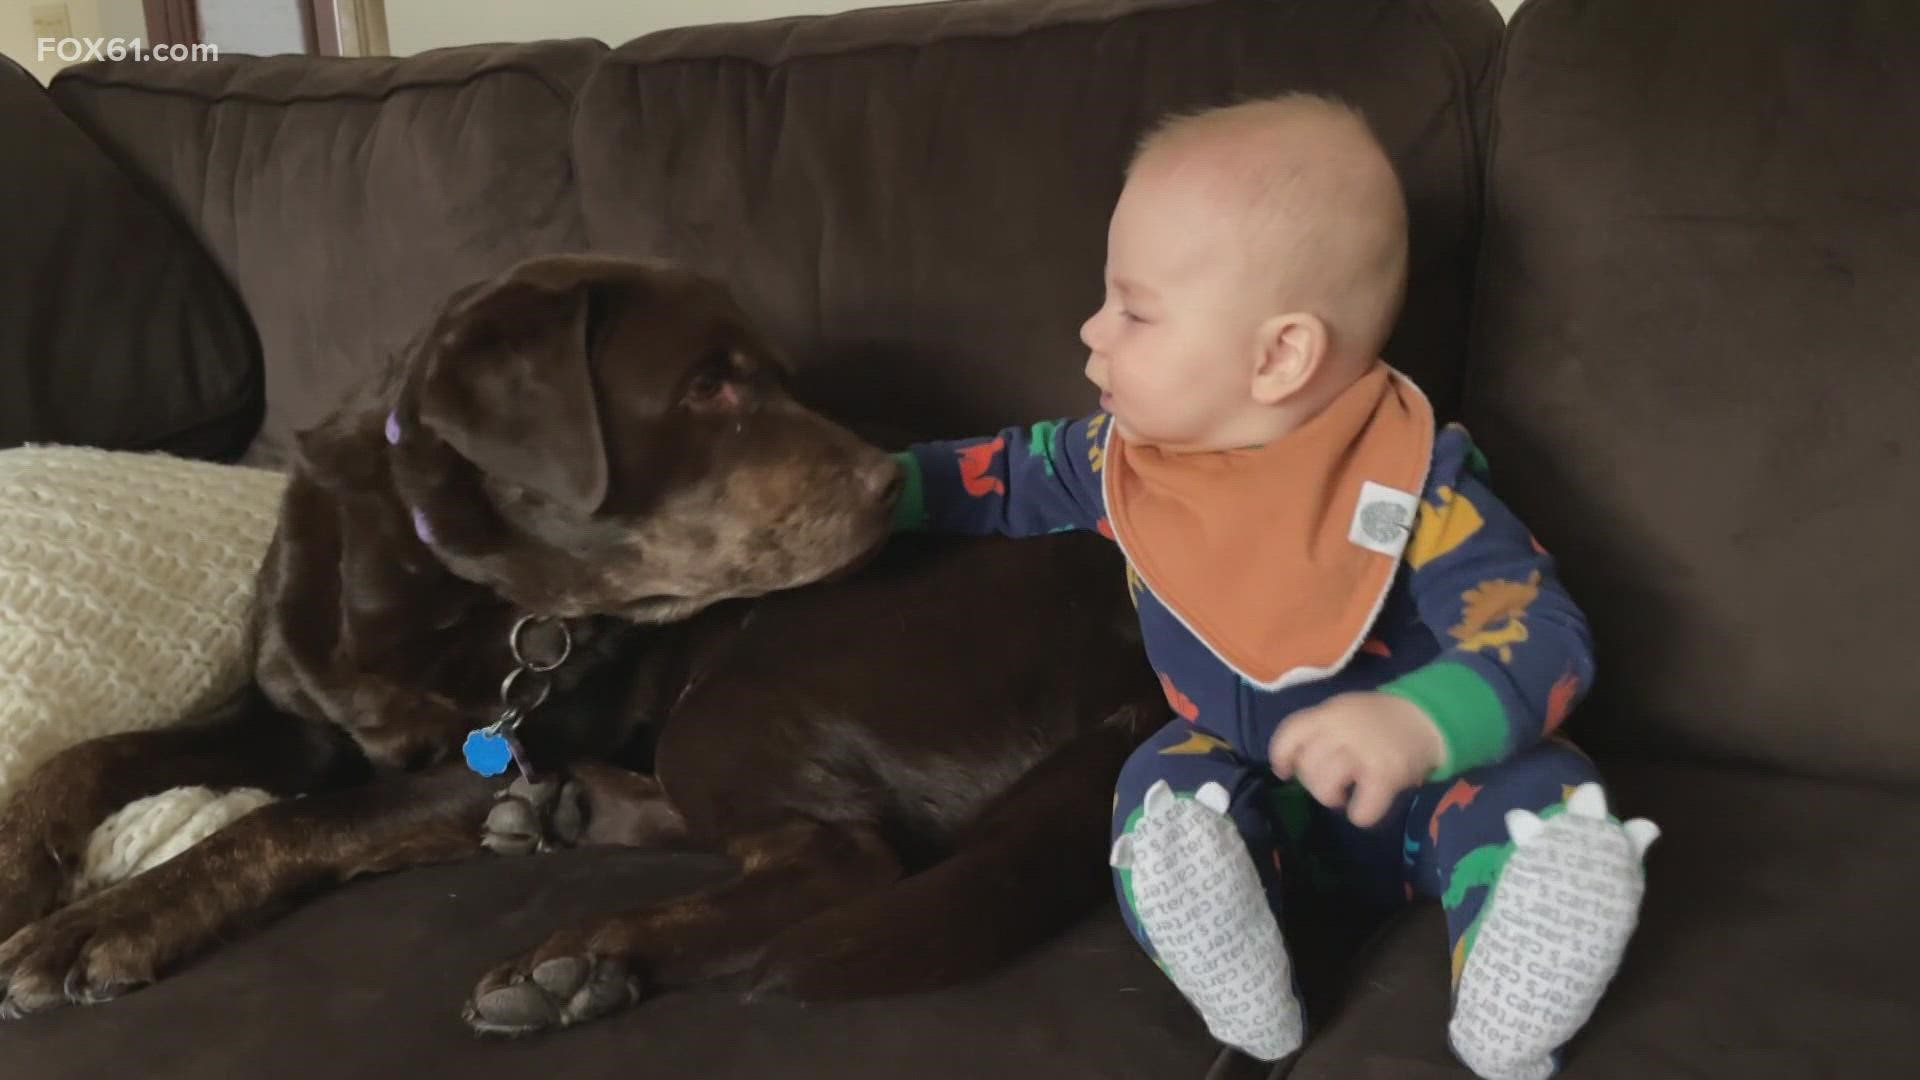 Making sure the canine and the new baby get along well